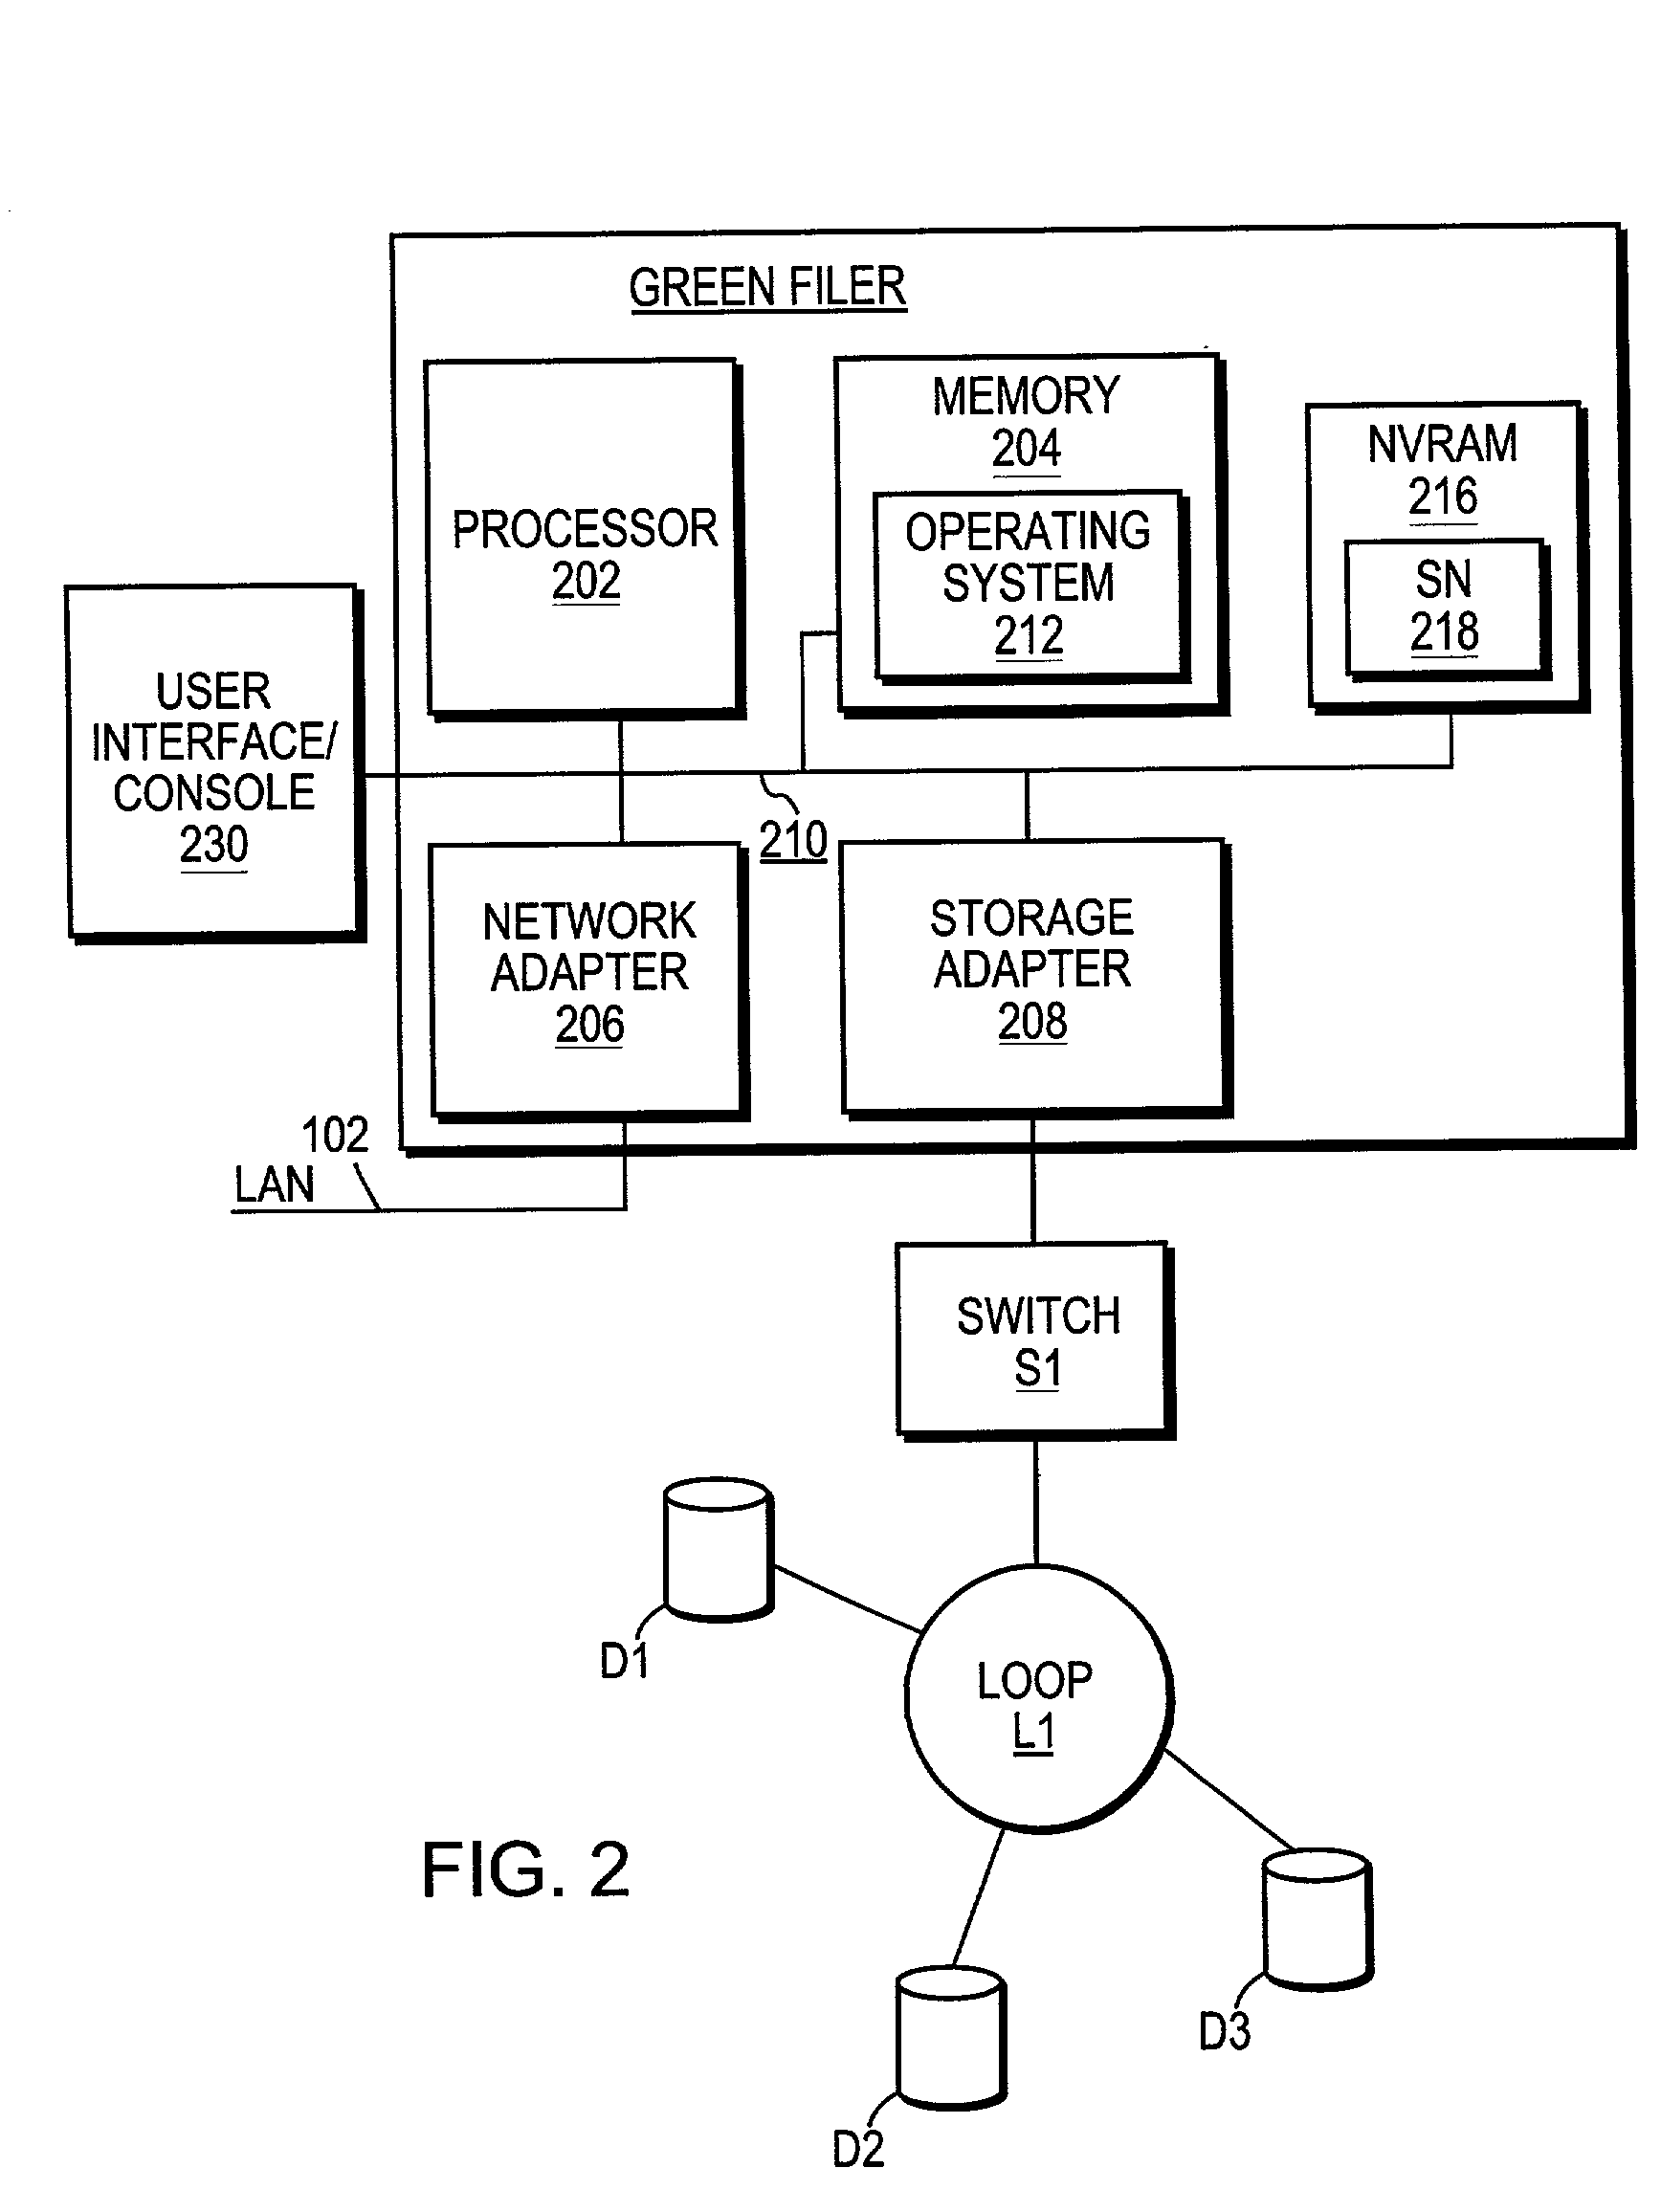 System and method for multipath I/O support for fibre channel devices